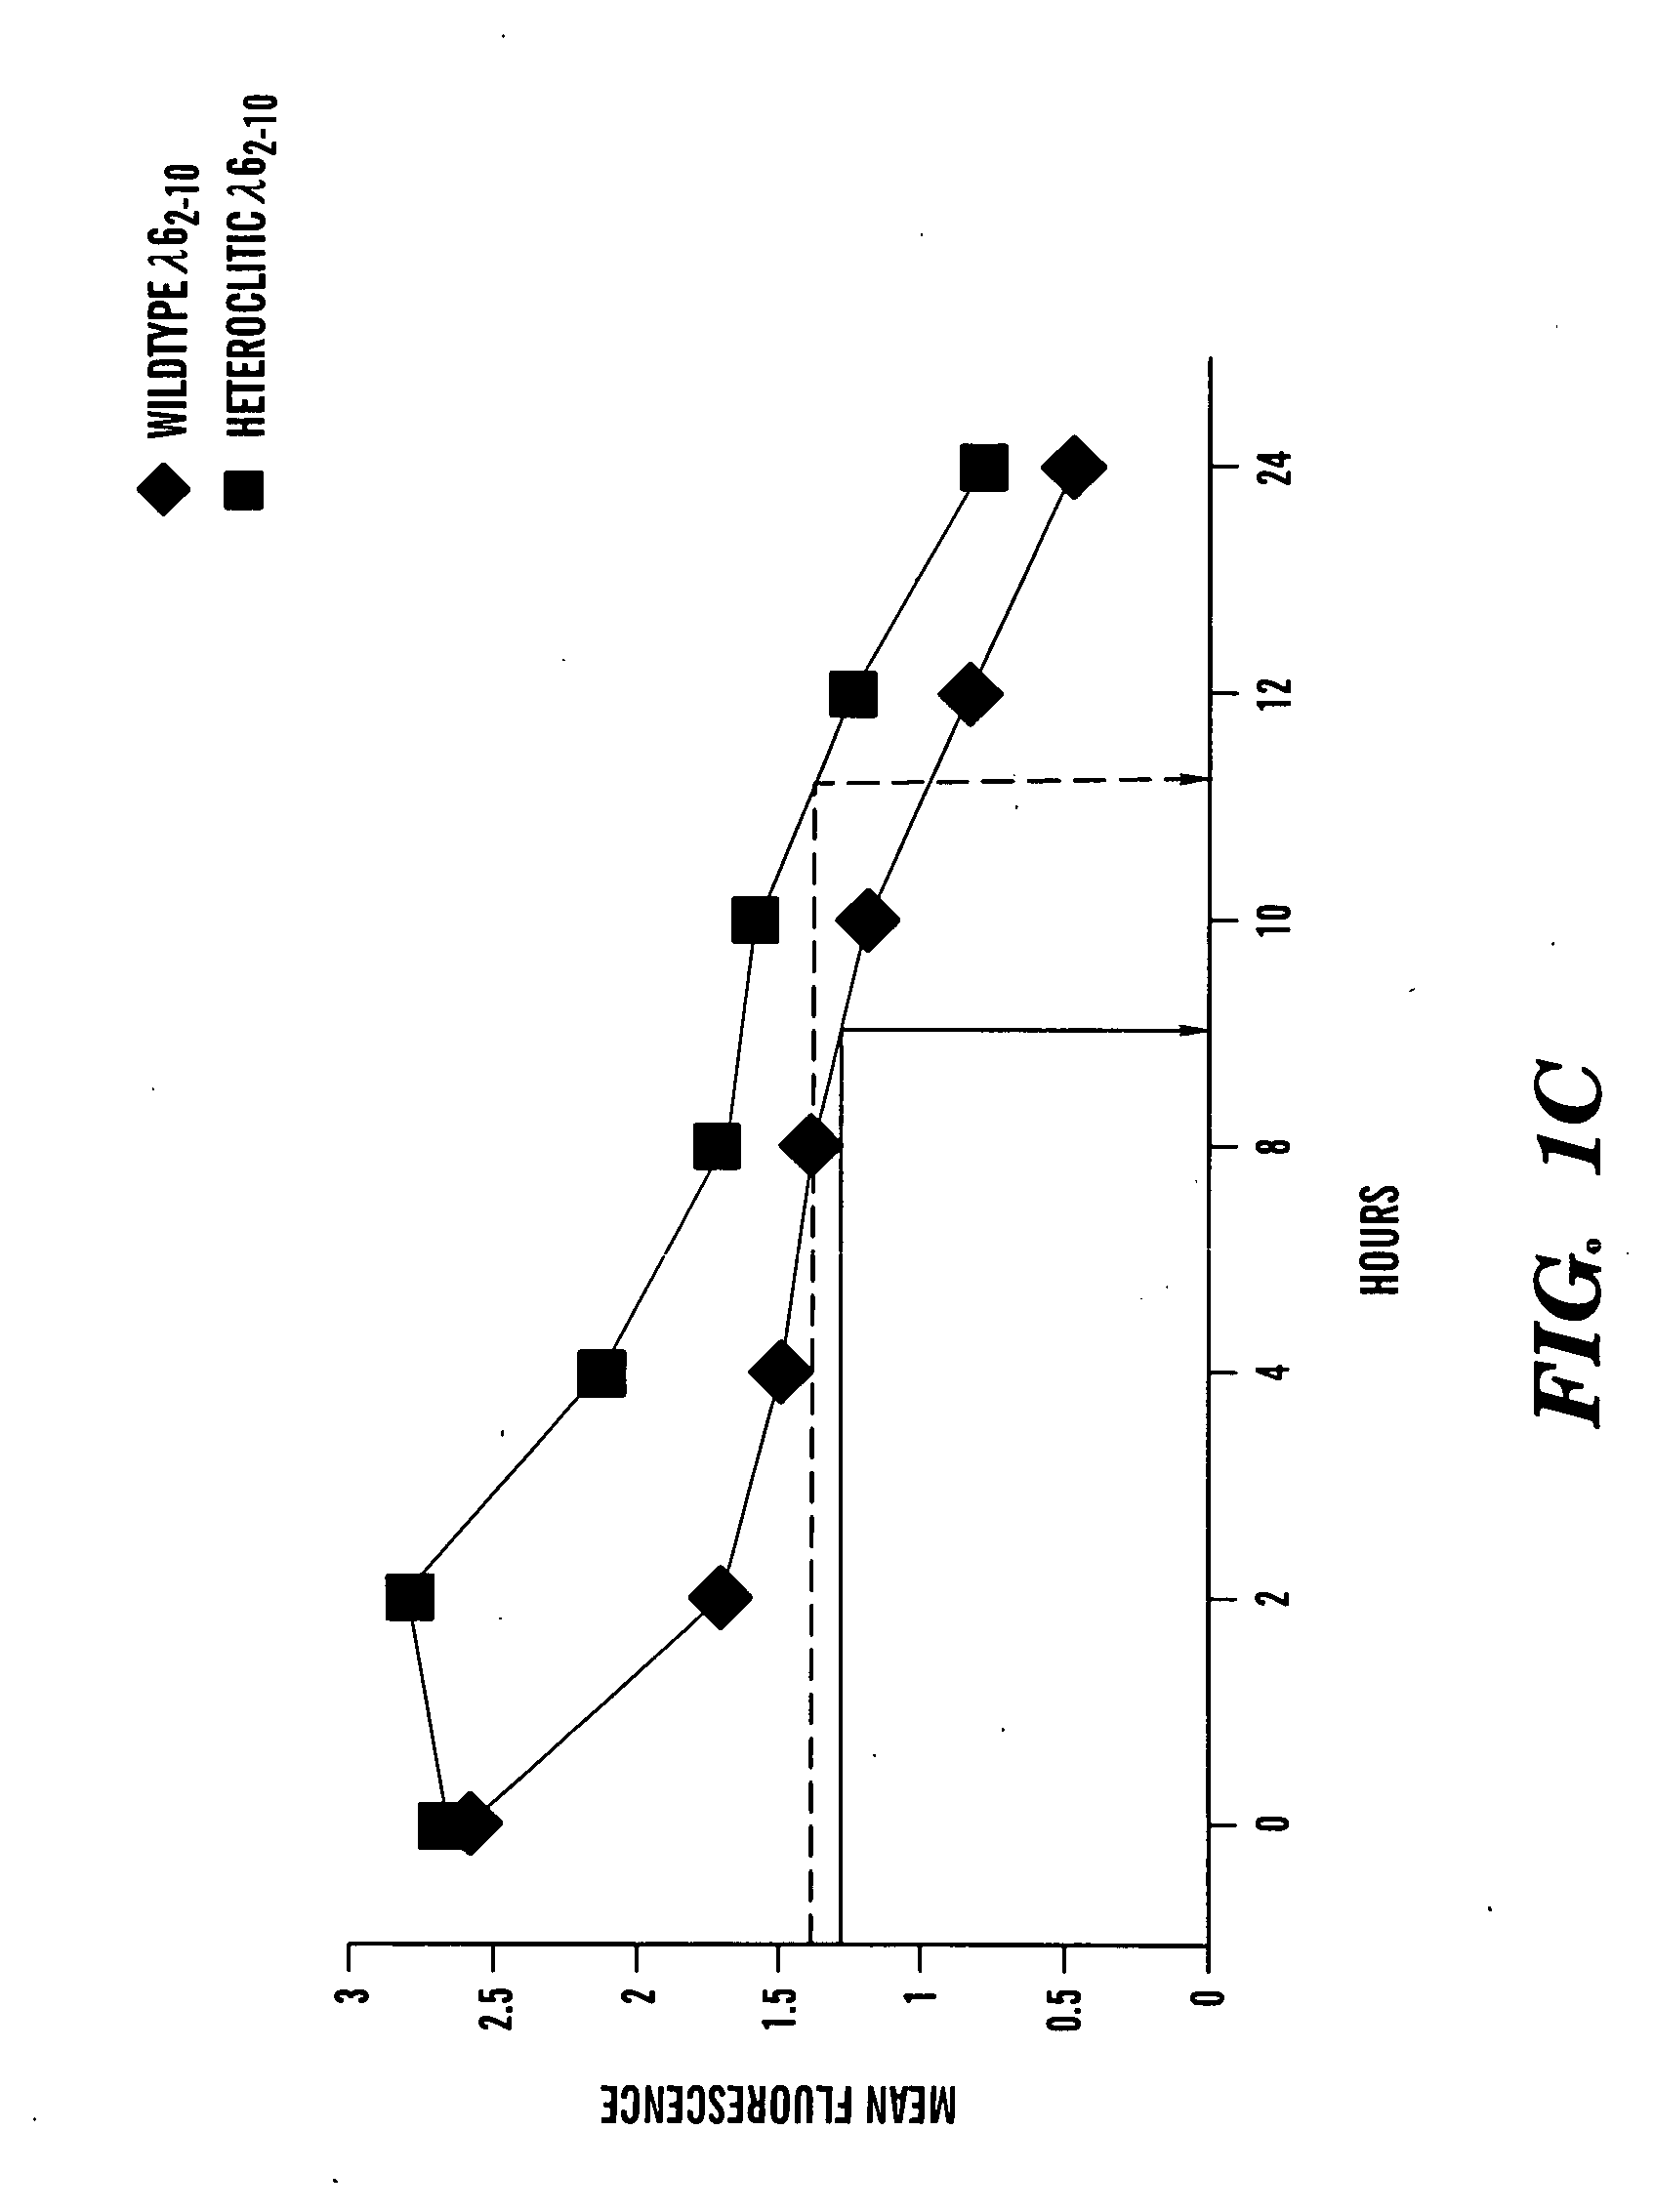 Multiple myeloma and al amyloid immunotherapy targeting immunoglobulin light chains and uses thereof